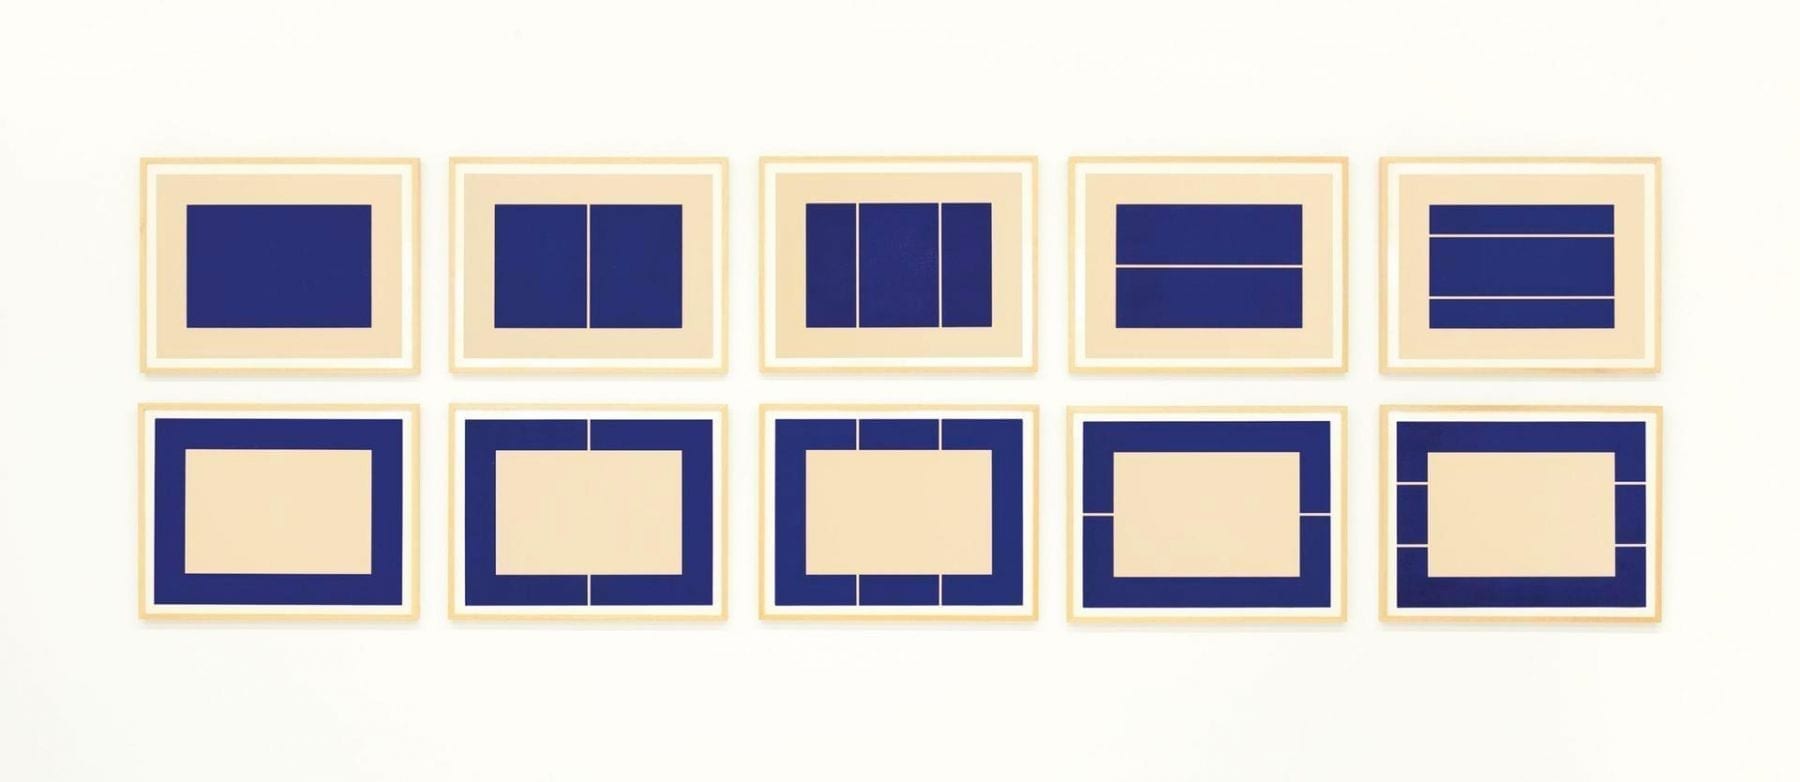 Donald Judd, Untitled, 1988, the complete set of ten woodcuts